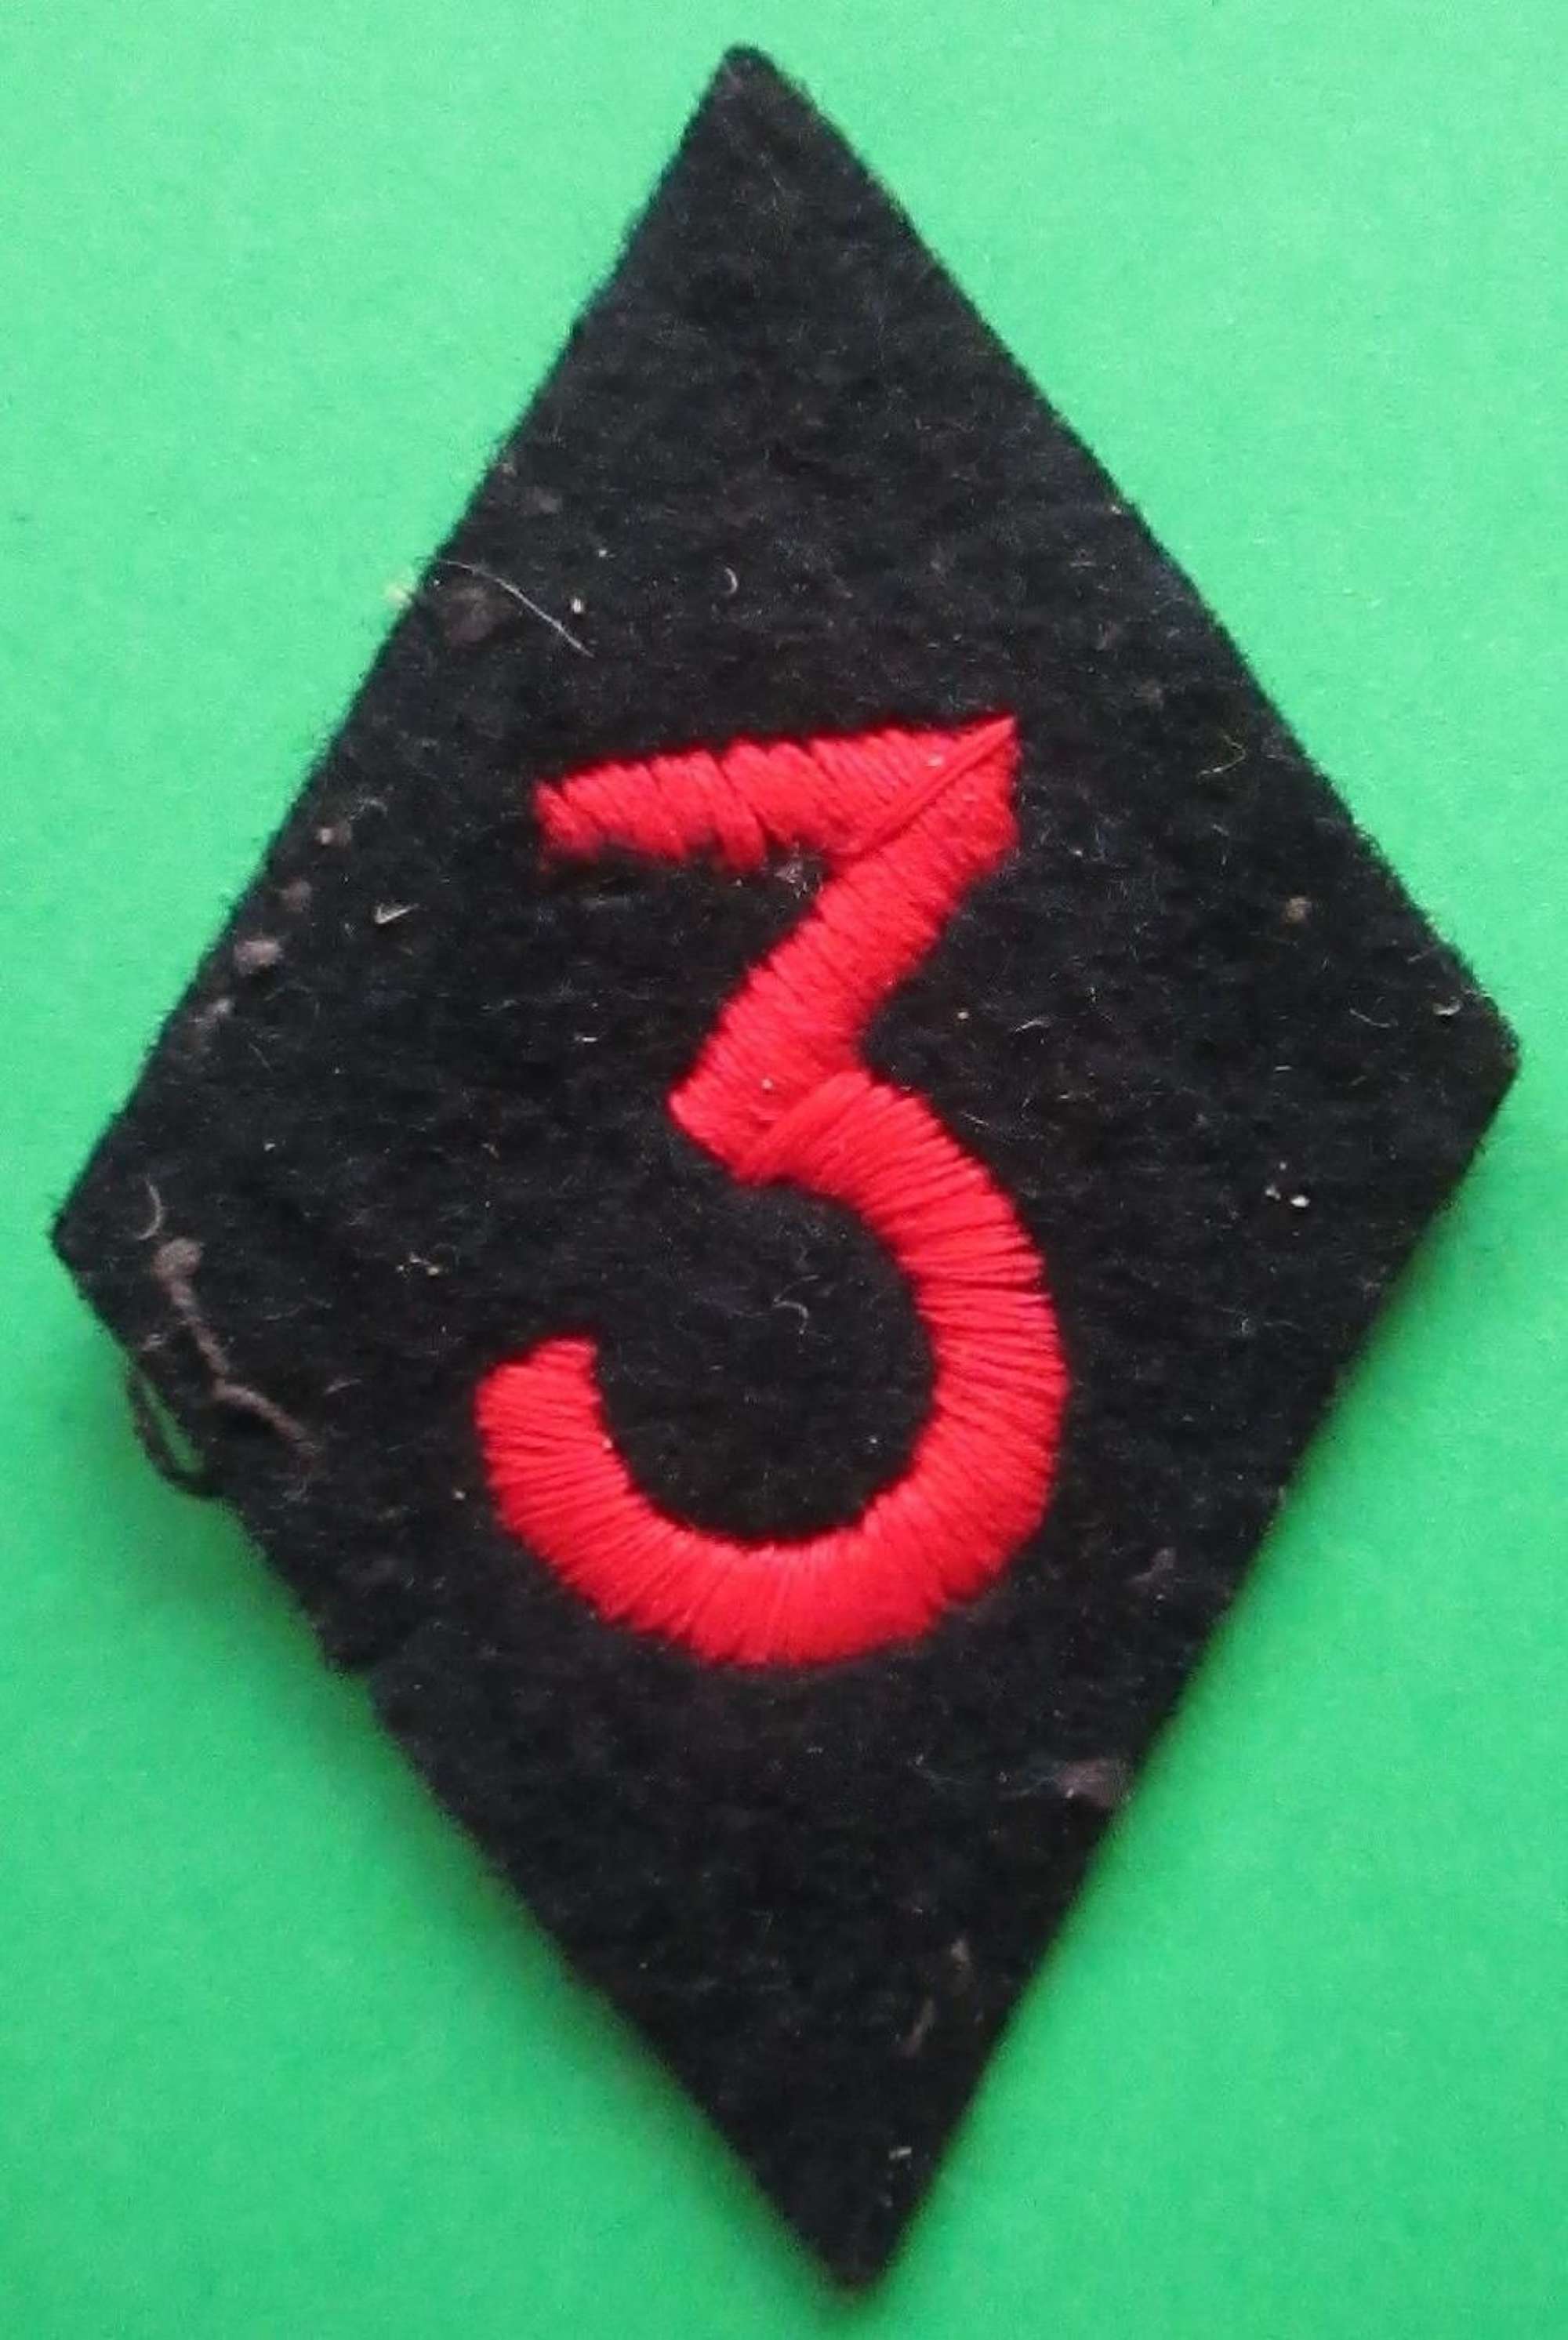 ROYAL ARTILLERY NO 3rd FLASH WORN BY THE 7th RA REGIMENT